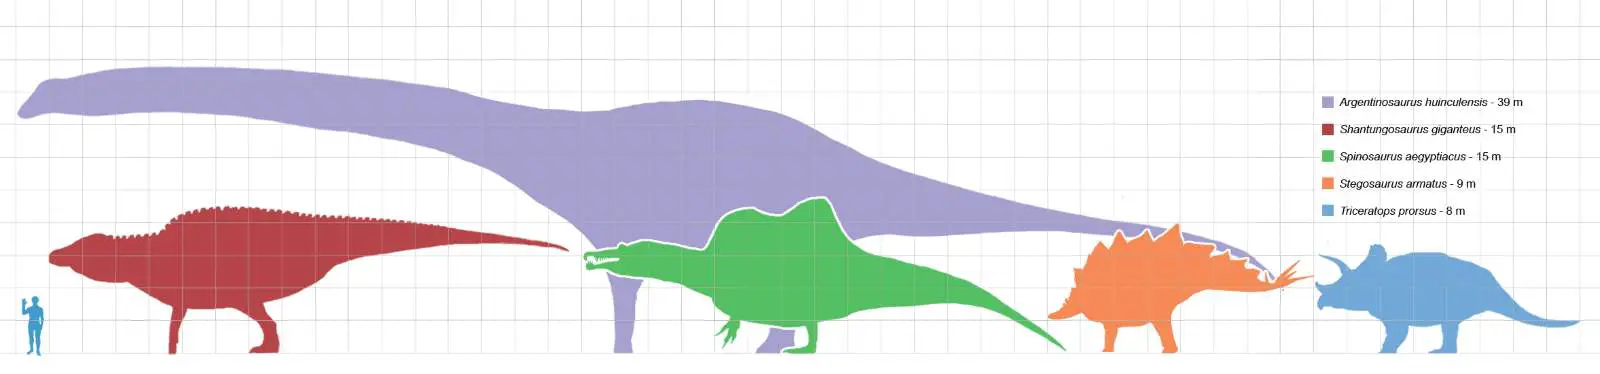 Largest dinosaurs scale